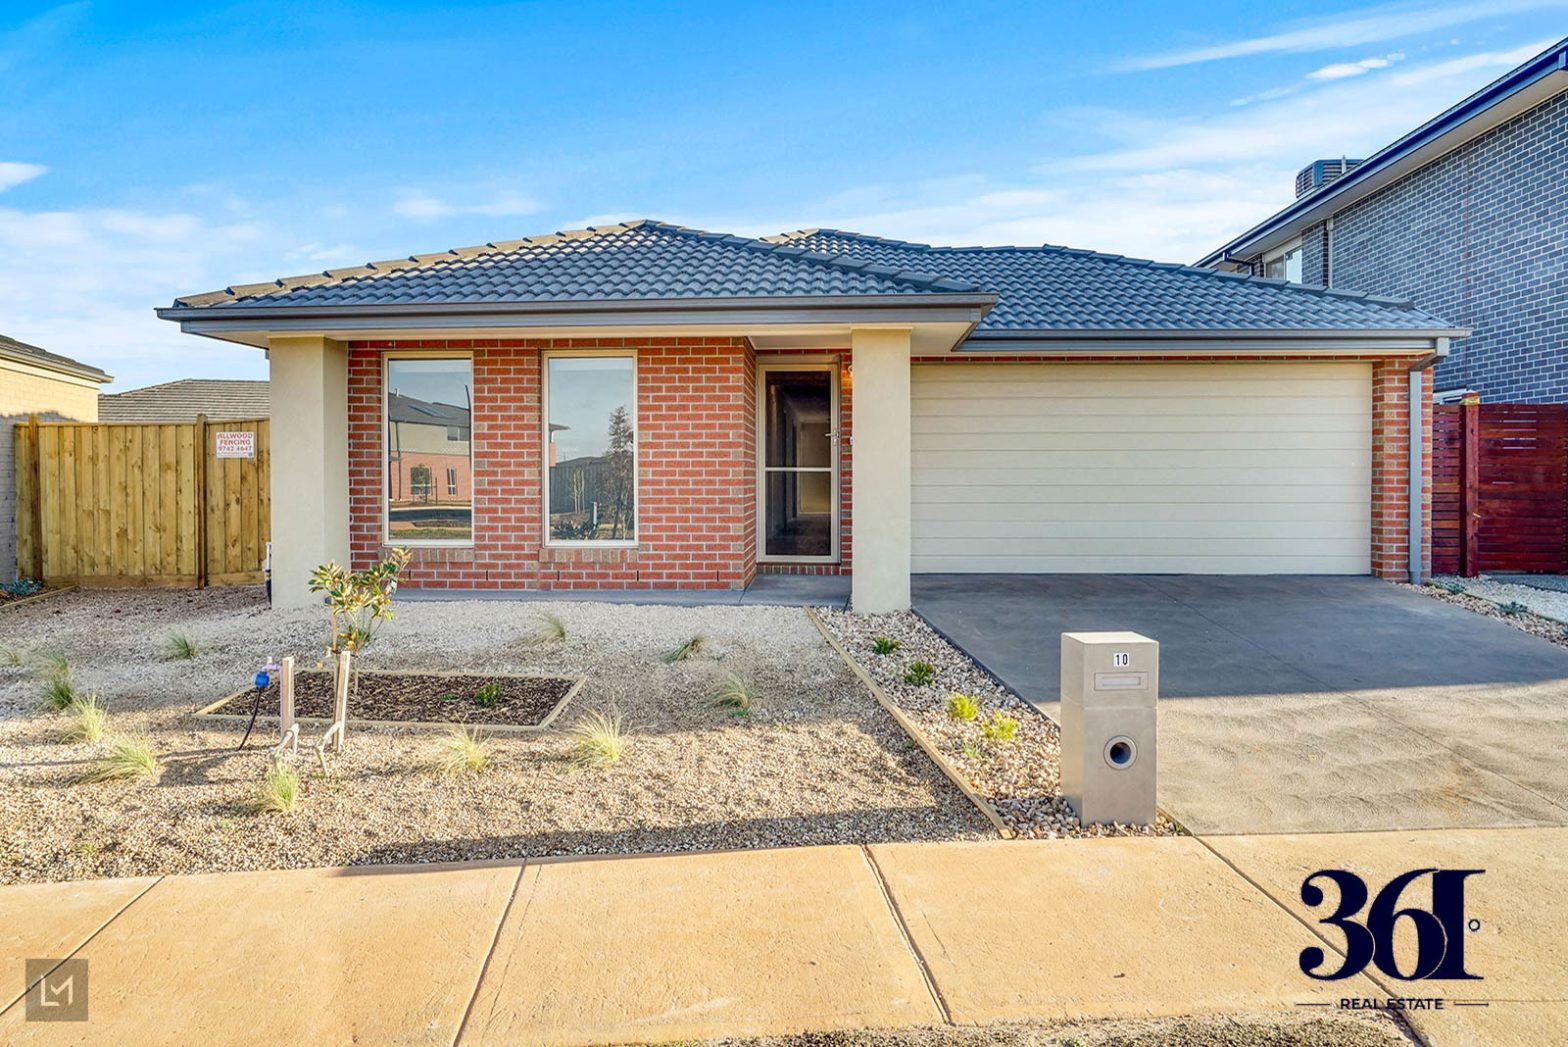 Perfect 4 Bedroom Family Home @ 400 pw